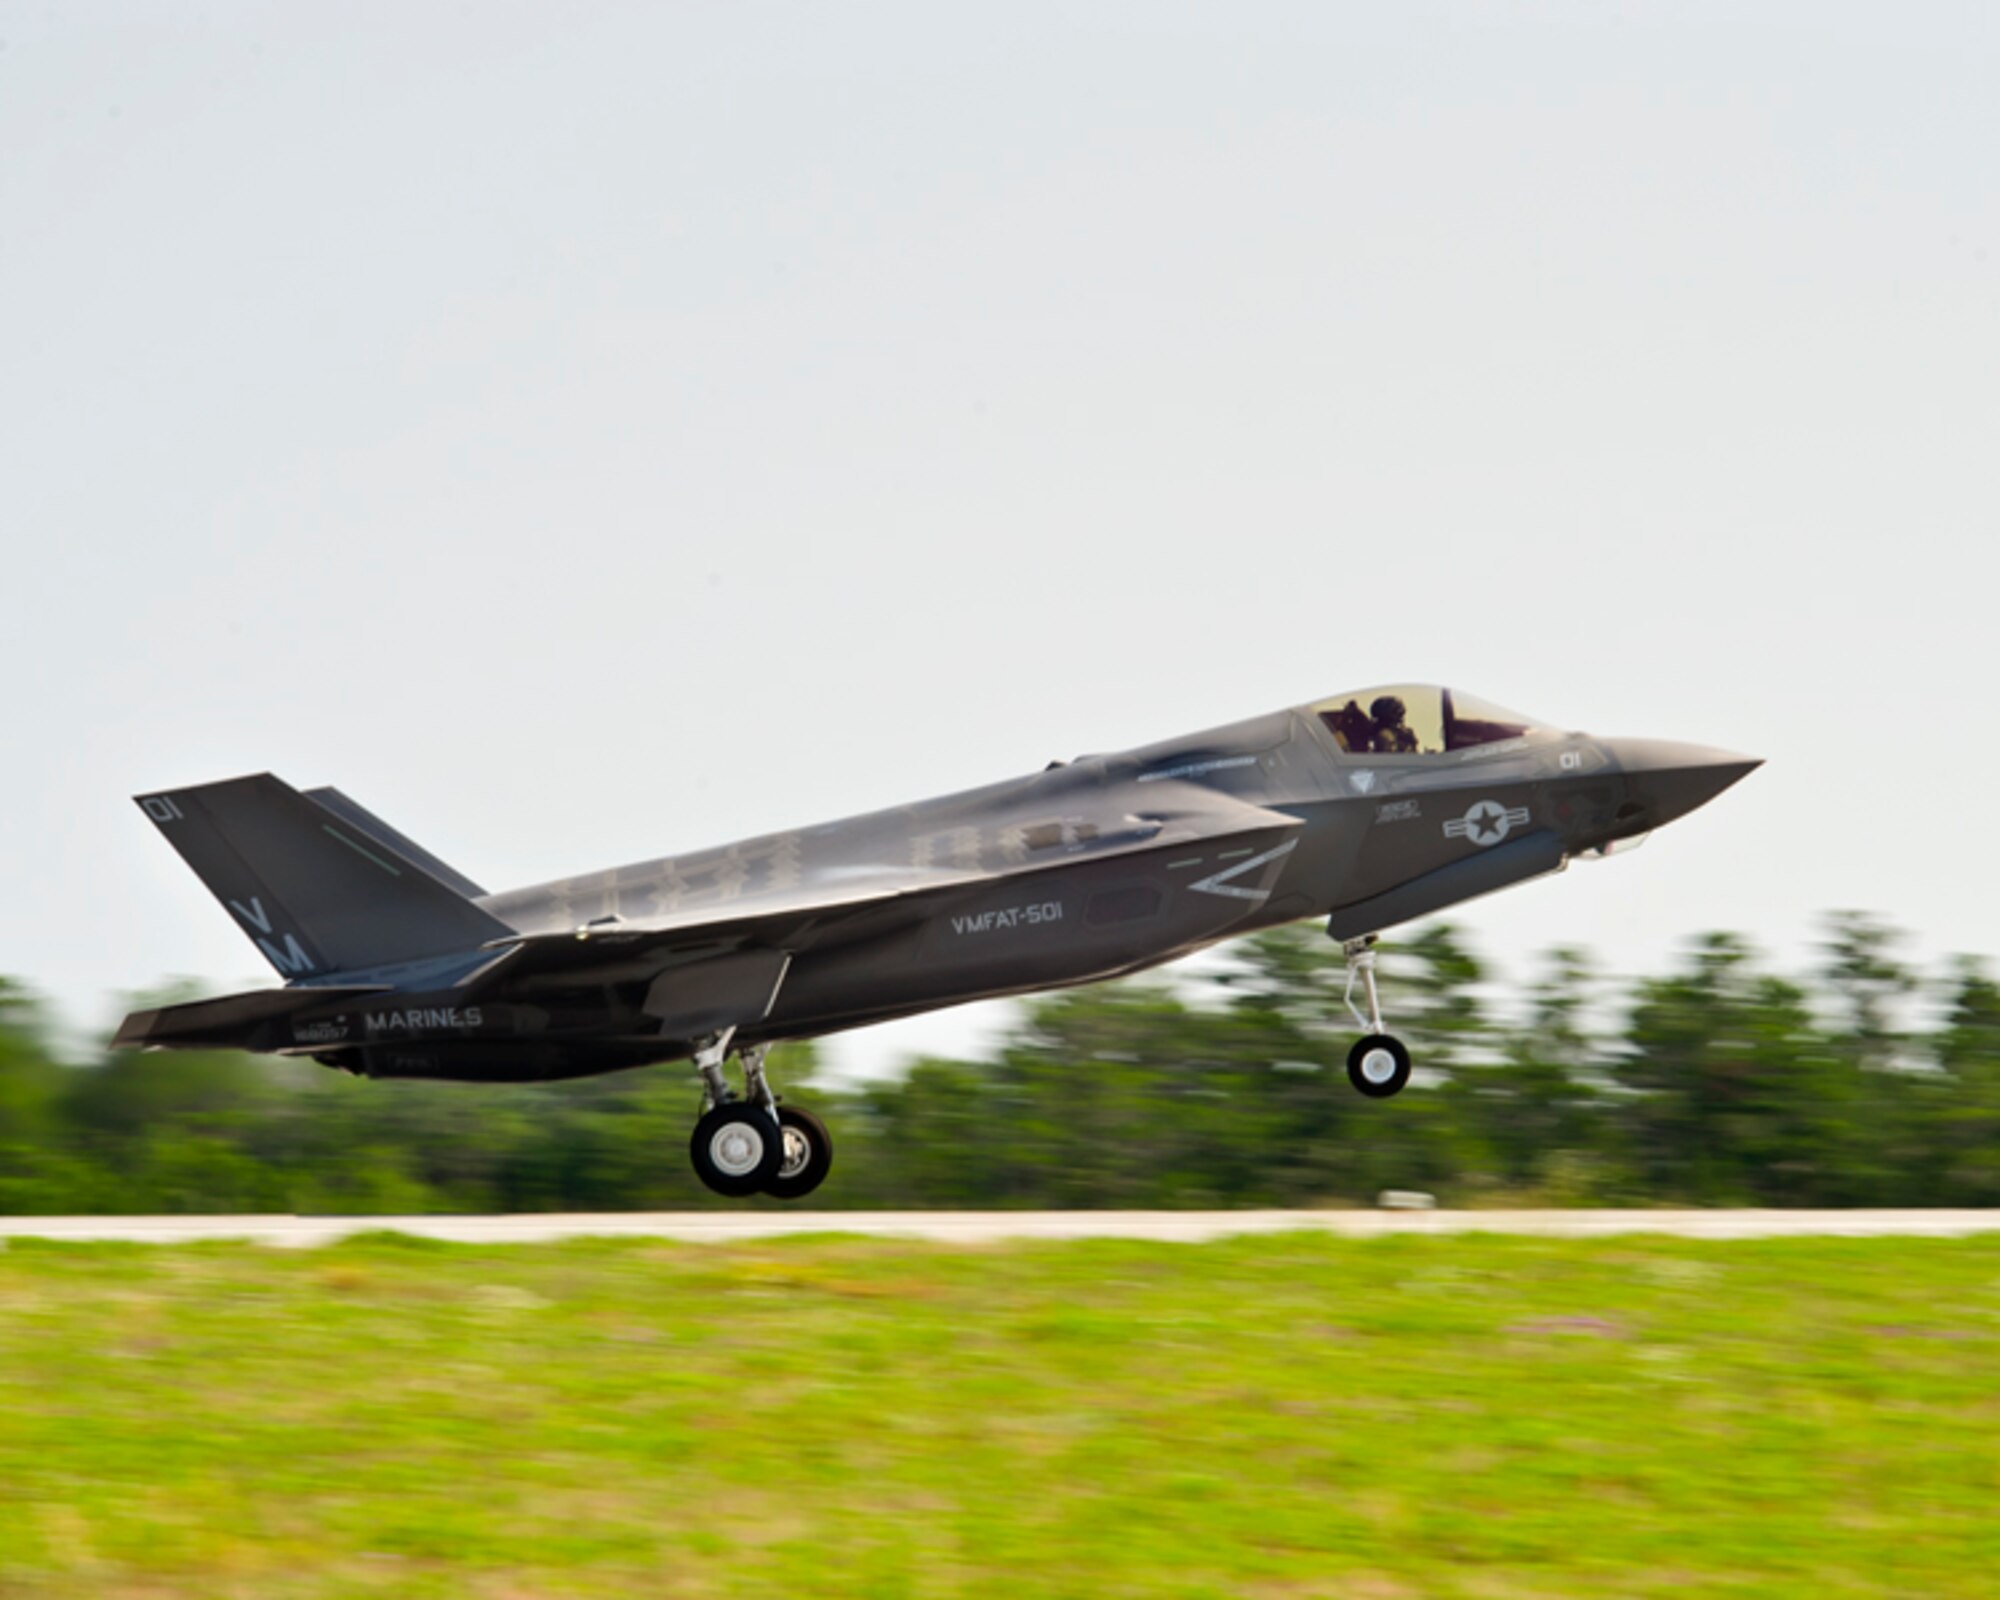 Marine Maj. Joseph Bachmann, a Marine Fighter Attack Training Squadron-501 pilot, takes off in his first F-35B sortie from Eglin Air Force Base, Fla., May 22. The goal for Marines was to start local area operations and conventional flights, beginning the process of gradually expanding the envelope to short takeoffs and vertical landings and more complex aerial training. The historic flight was airborne during the Marine Corps' 100th year of aviation, two months after 2nd Marine Aircraft Wing officially introduced the service's fifth generation fighter to the world at the 33rd Fighter Wing. (Lockheed Martin photo/David Drais)